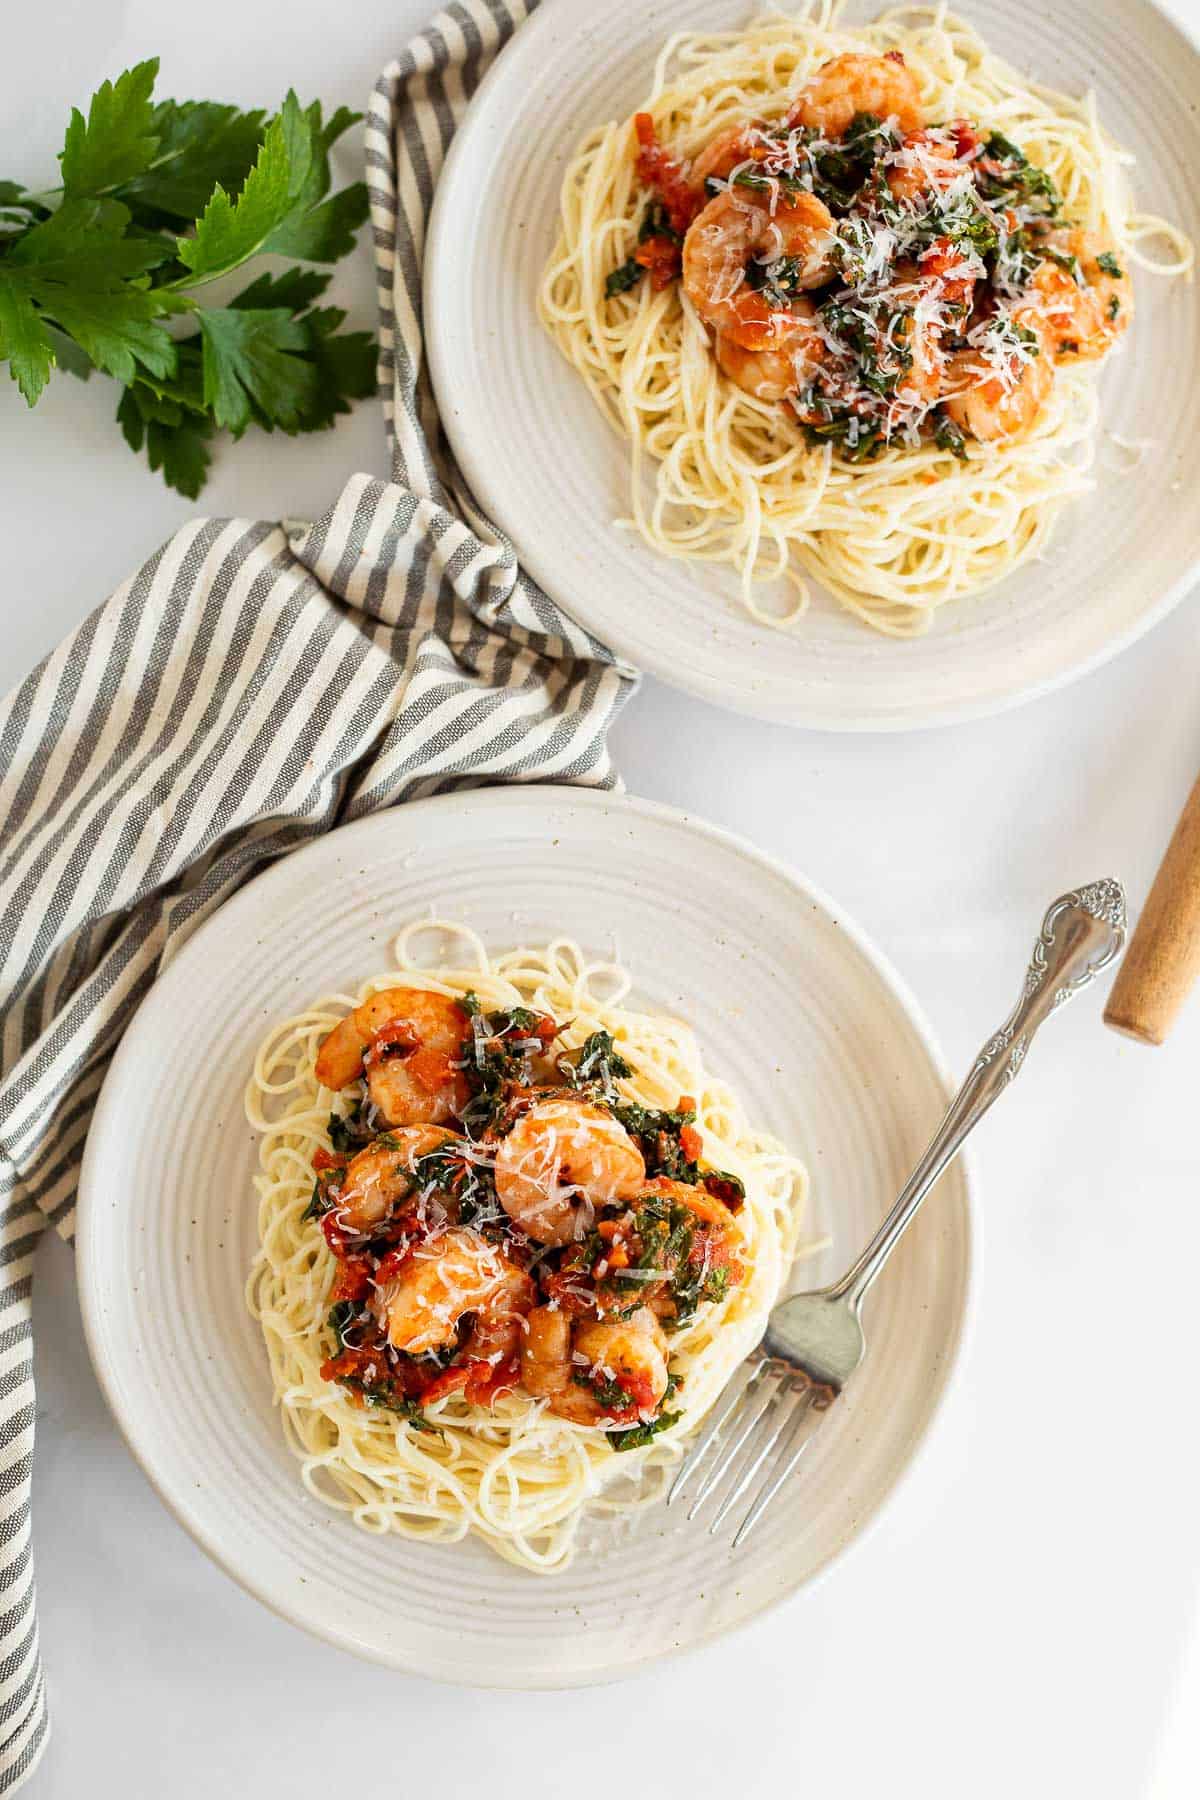 Spicy shrimp and kale served over angel hair pasta on white plates with a fork and a stripped napkin.